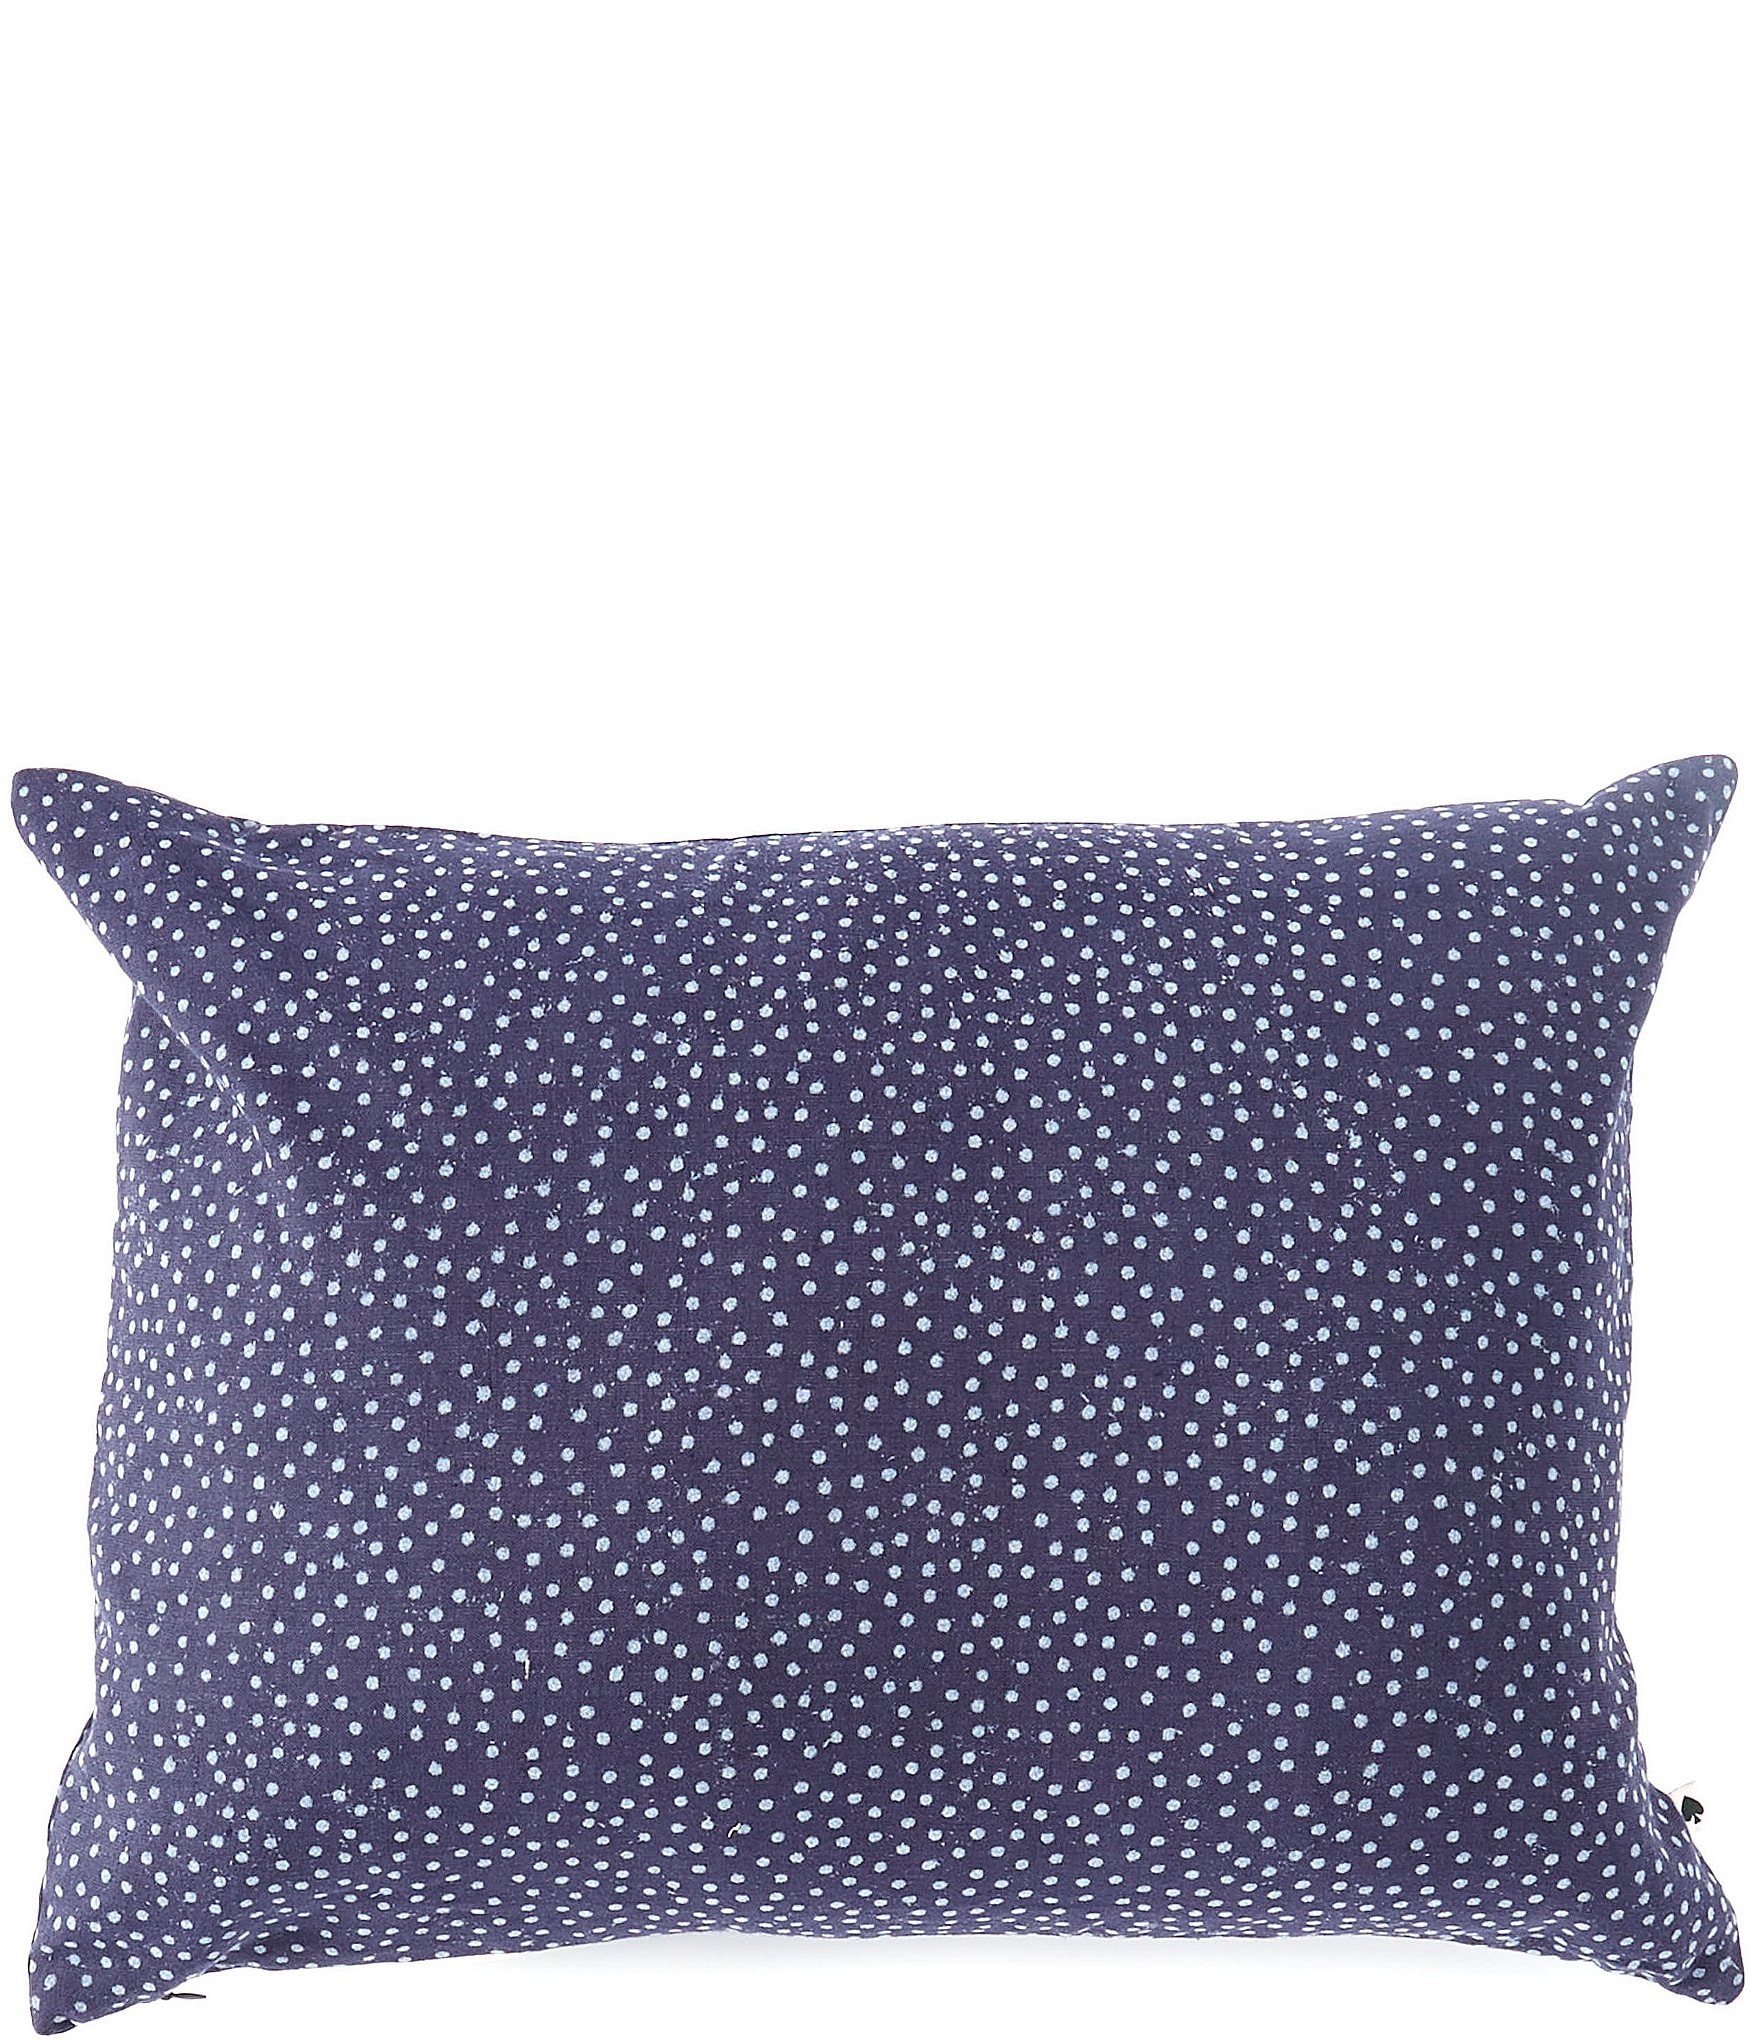 kate spade new: Bedding & Bedding Collections | Dillard's